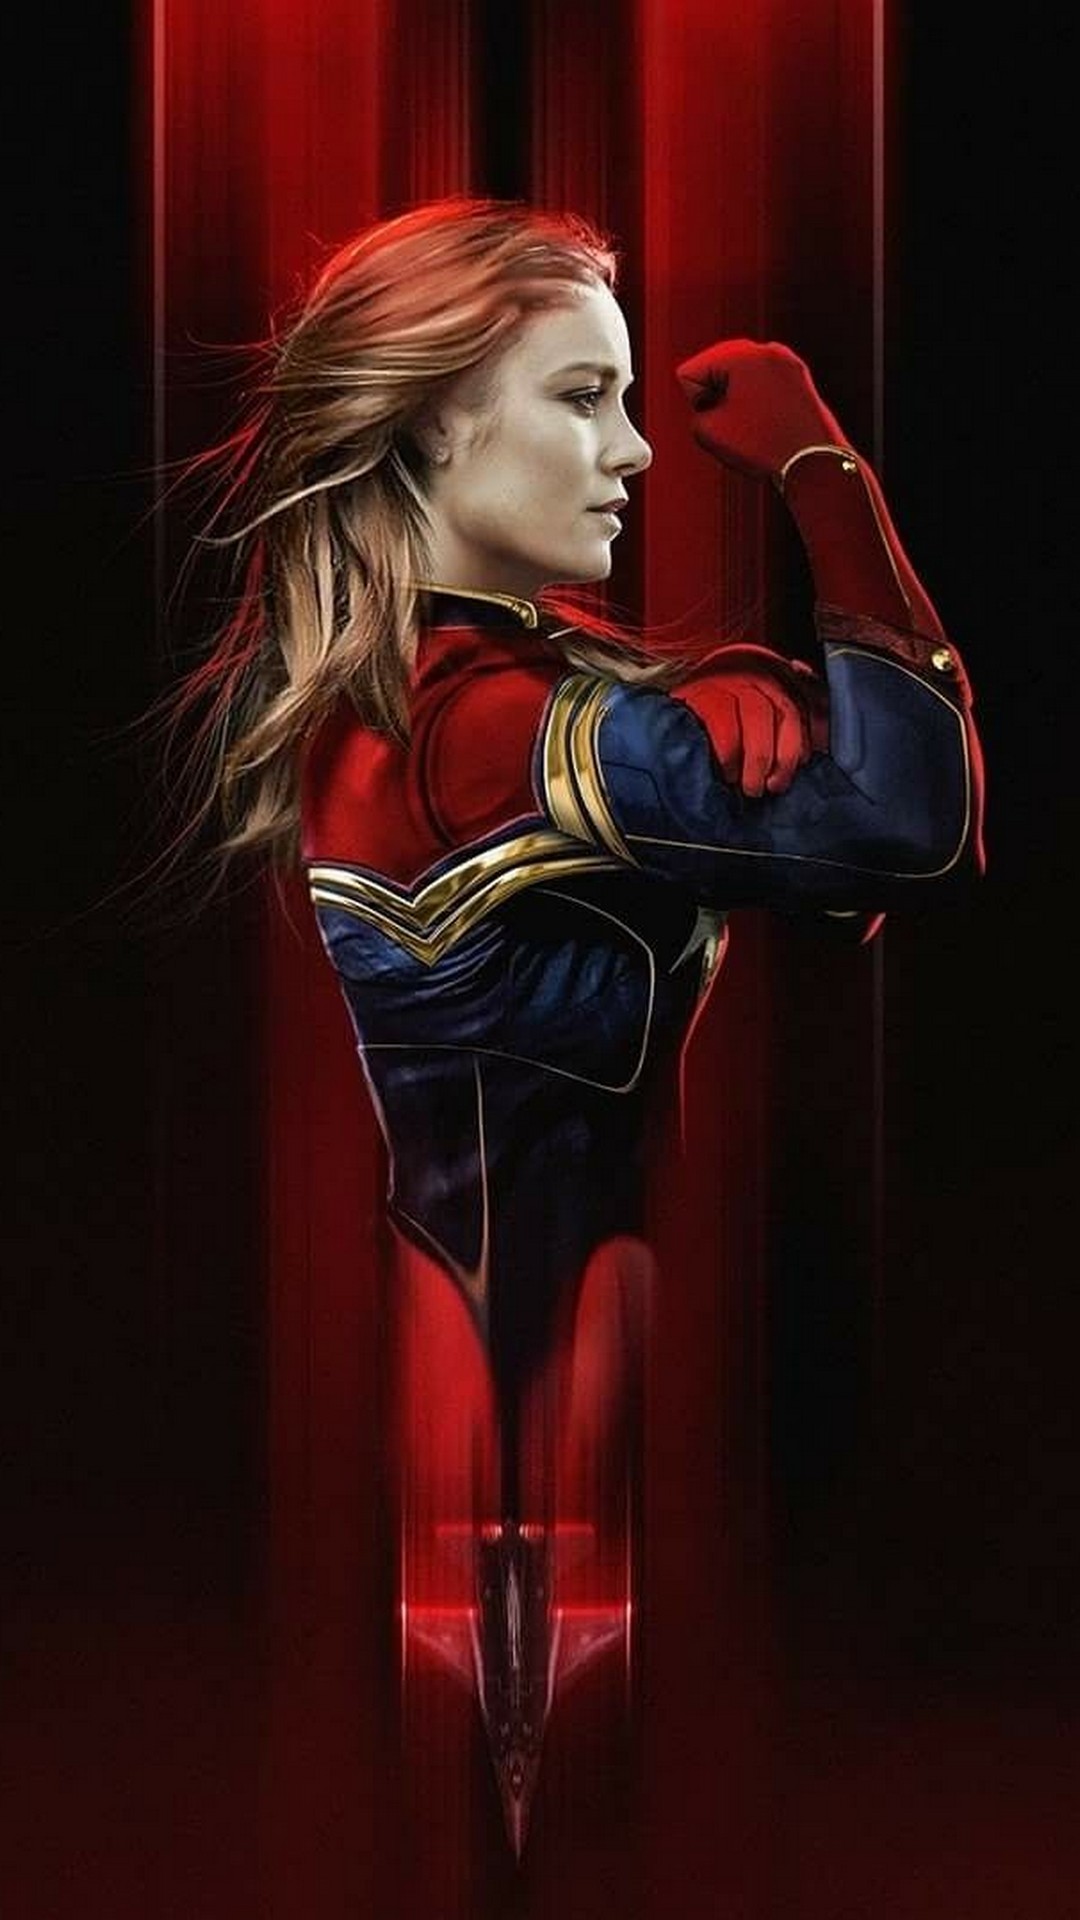 Phones Wallpaper Captain Marvel 2019 with high-resolution 1080x1920 pixel. Download all Mobile Wallpapers and Use them as wallpapers for your iPhone, Tablet, iPad, Android and other mobile devices